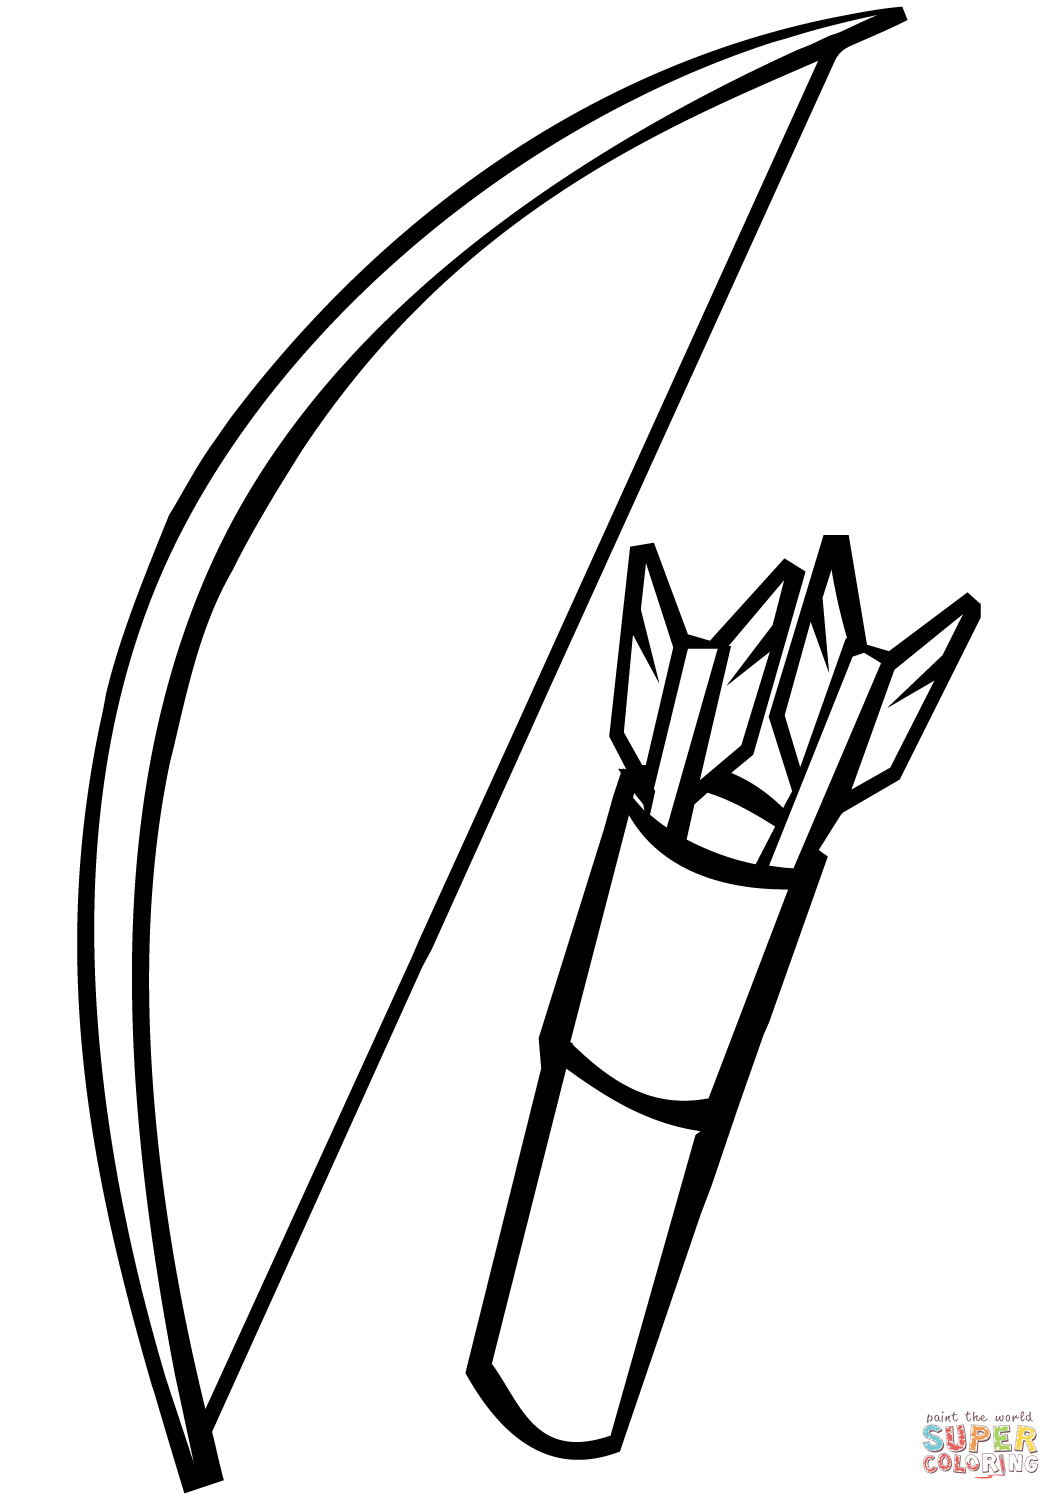 Bow and Arrows coloring page | Free Printable Coloring Pages